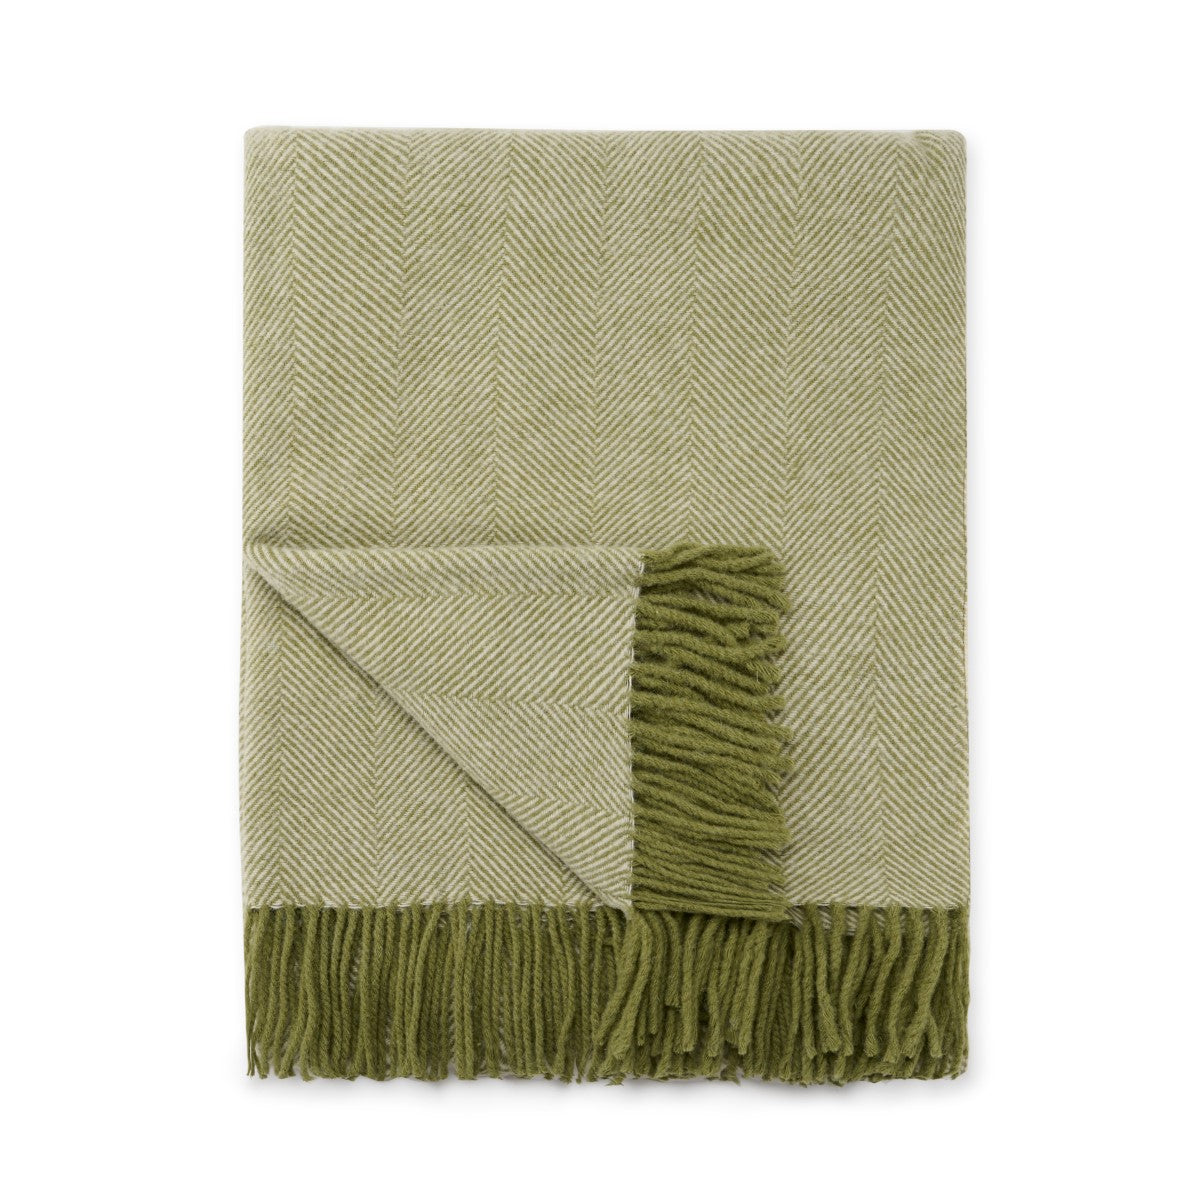 Wool Throw - Olive